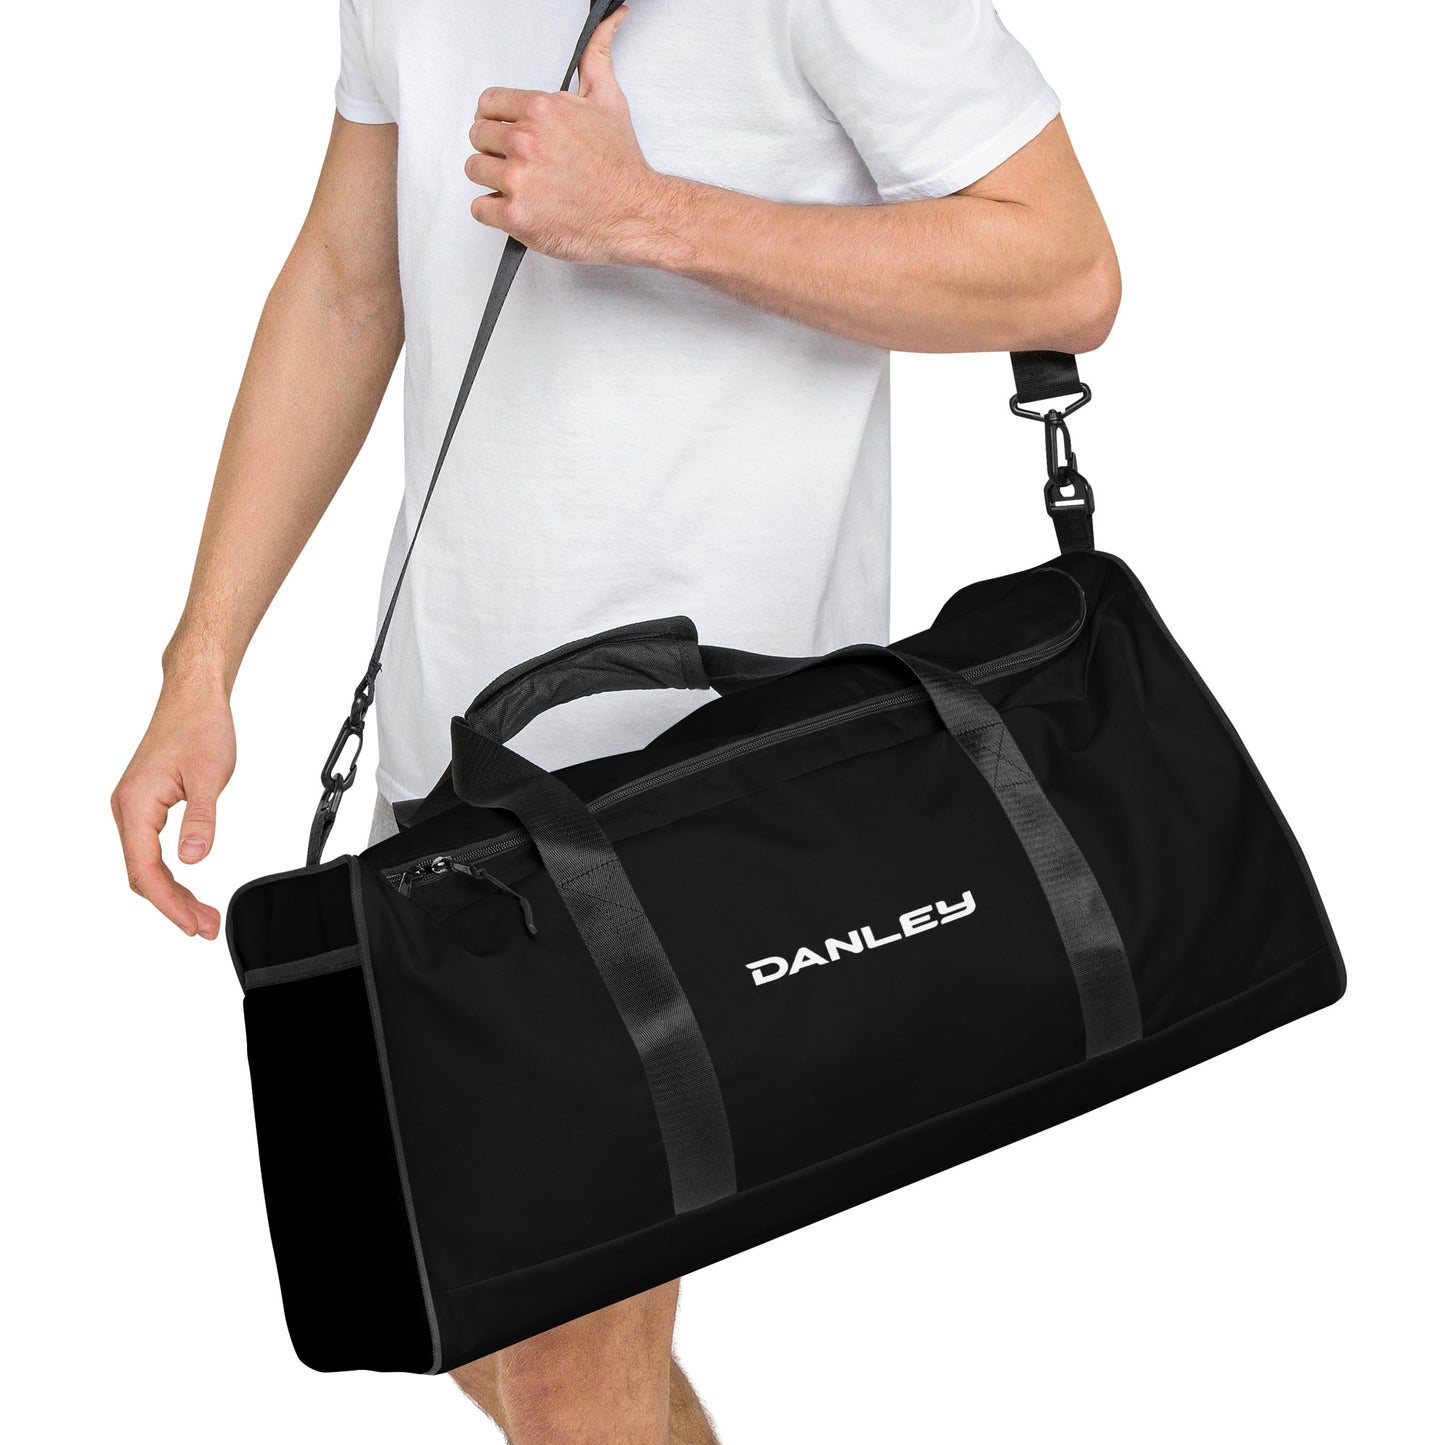 All-over Duffle Bag